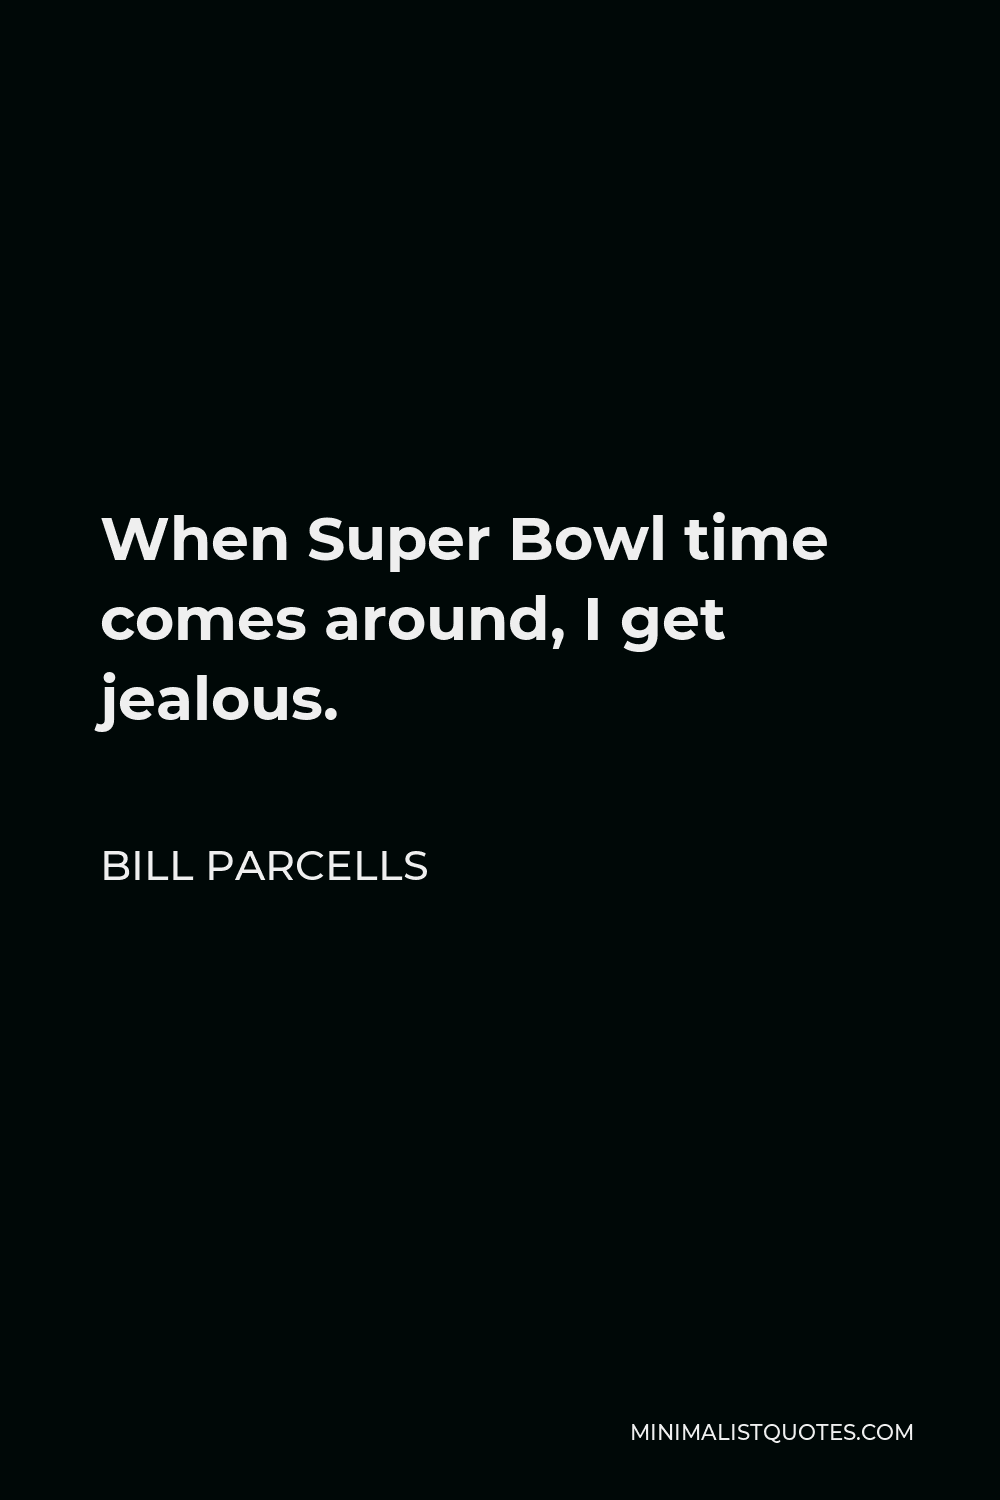 Bill Parcells Quote - When Super Bowl time comes around, I get jealous.